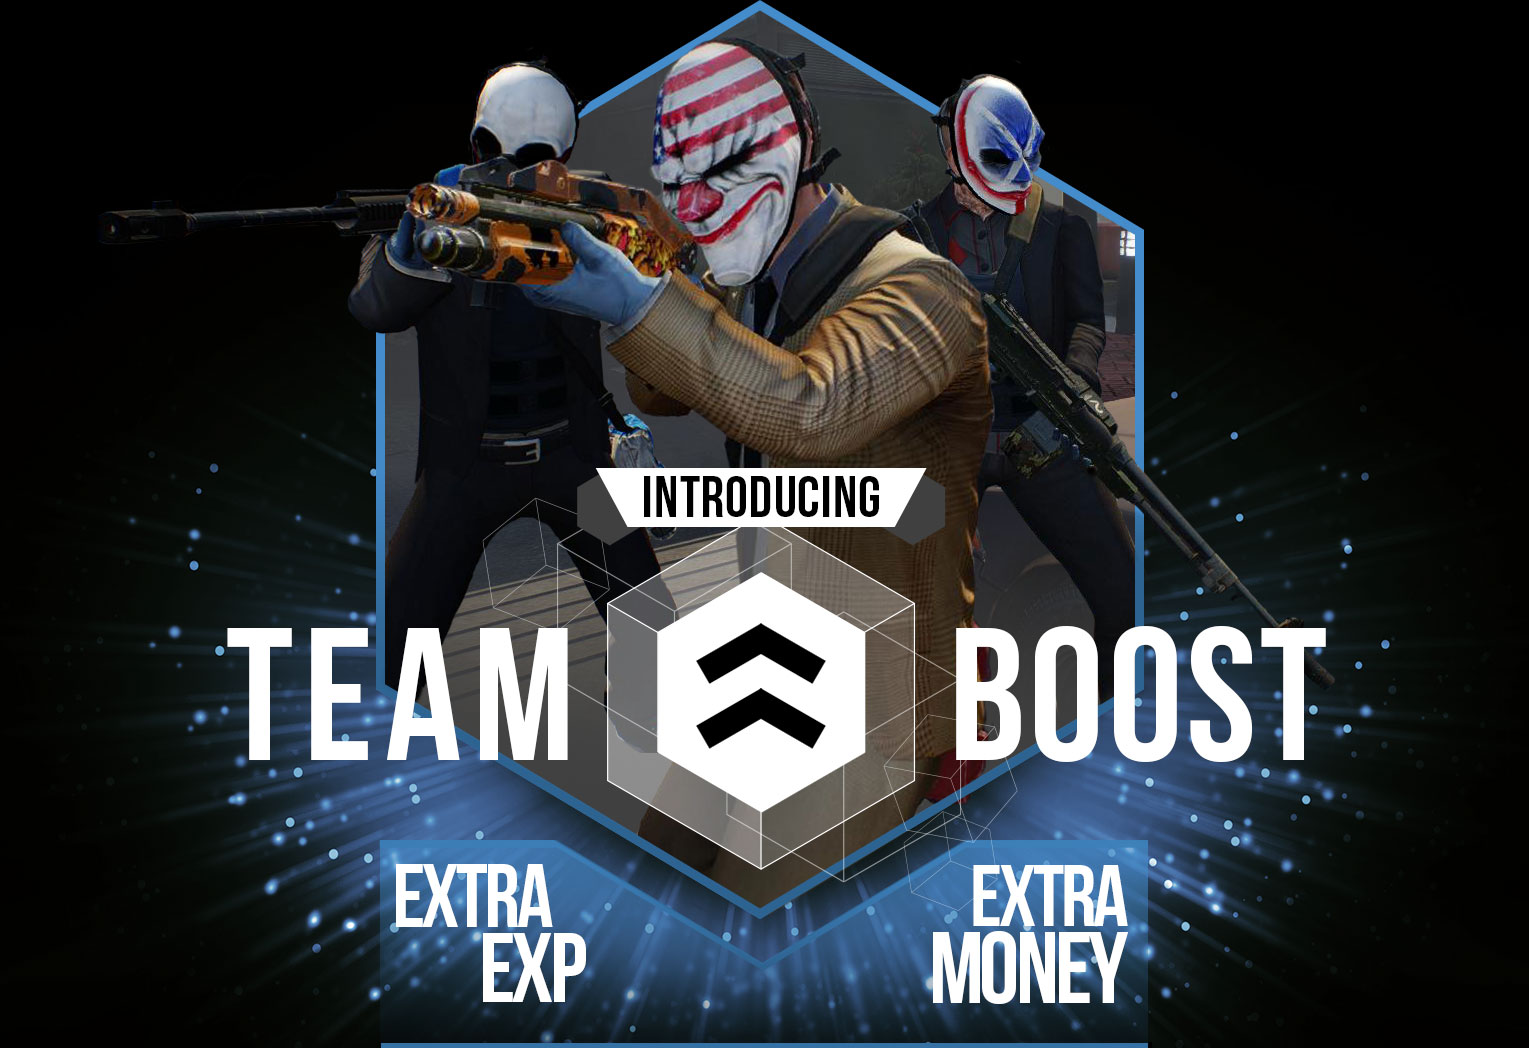 Introducing Team Boost